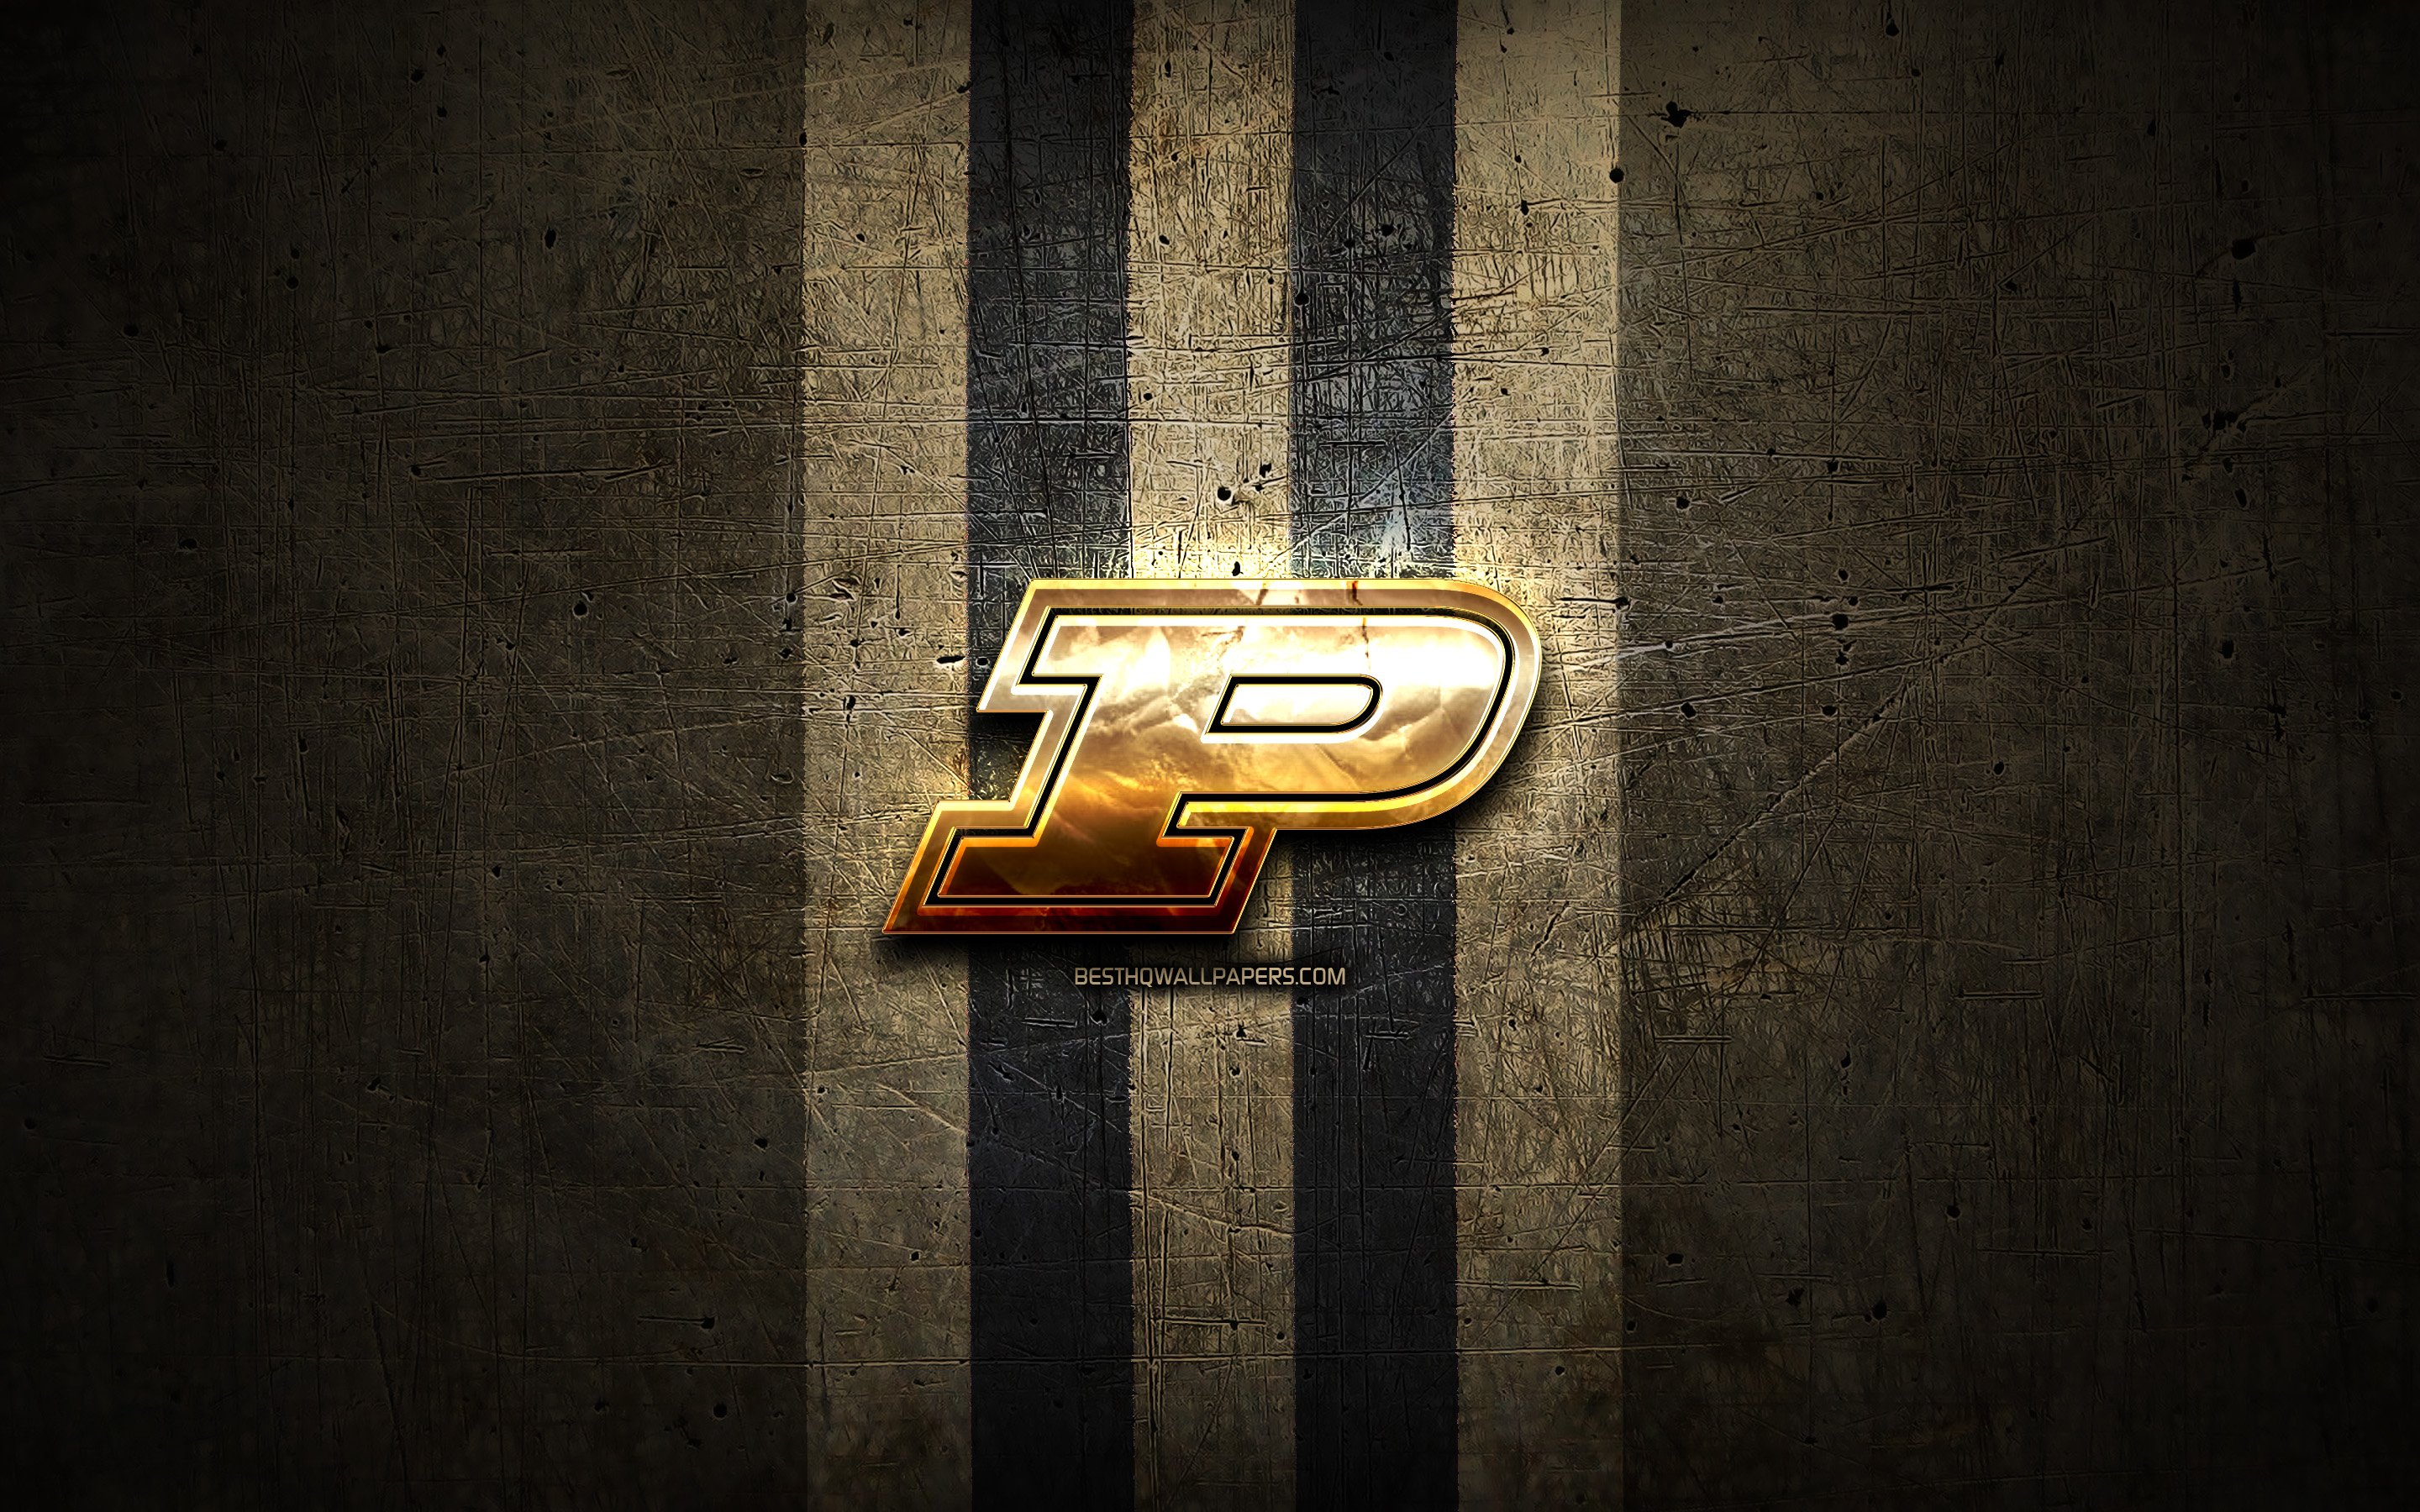 Download wallpaper Purdue Boilermakers, golden logo, NCAA, brown metal background, american football club, Purdue Boilermakers logo, american football, USA for desktop with resolution 2880x1800. High Quality HD picture wallpaper